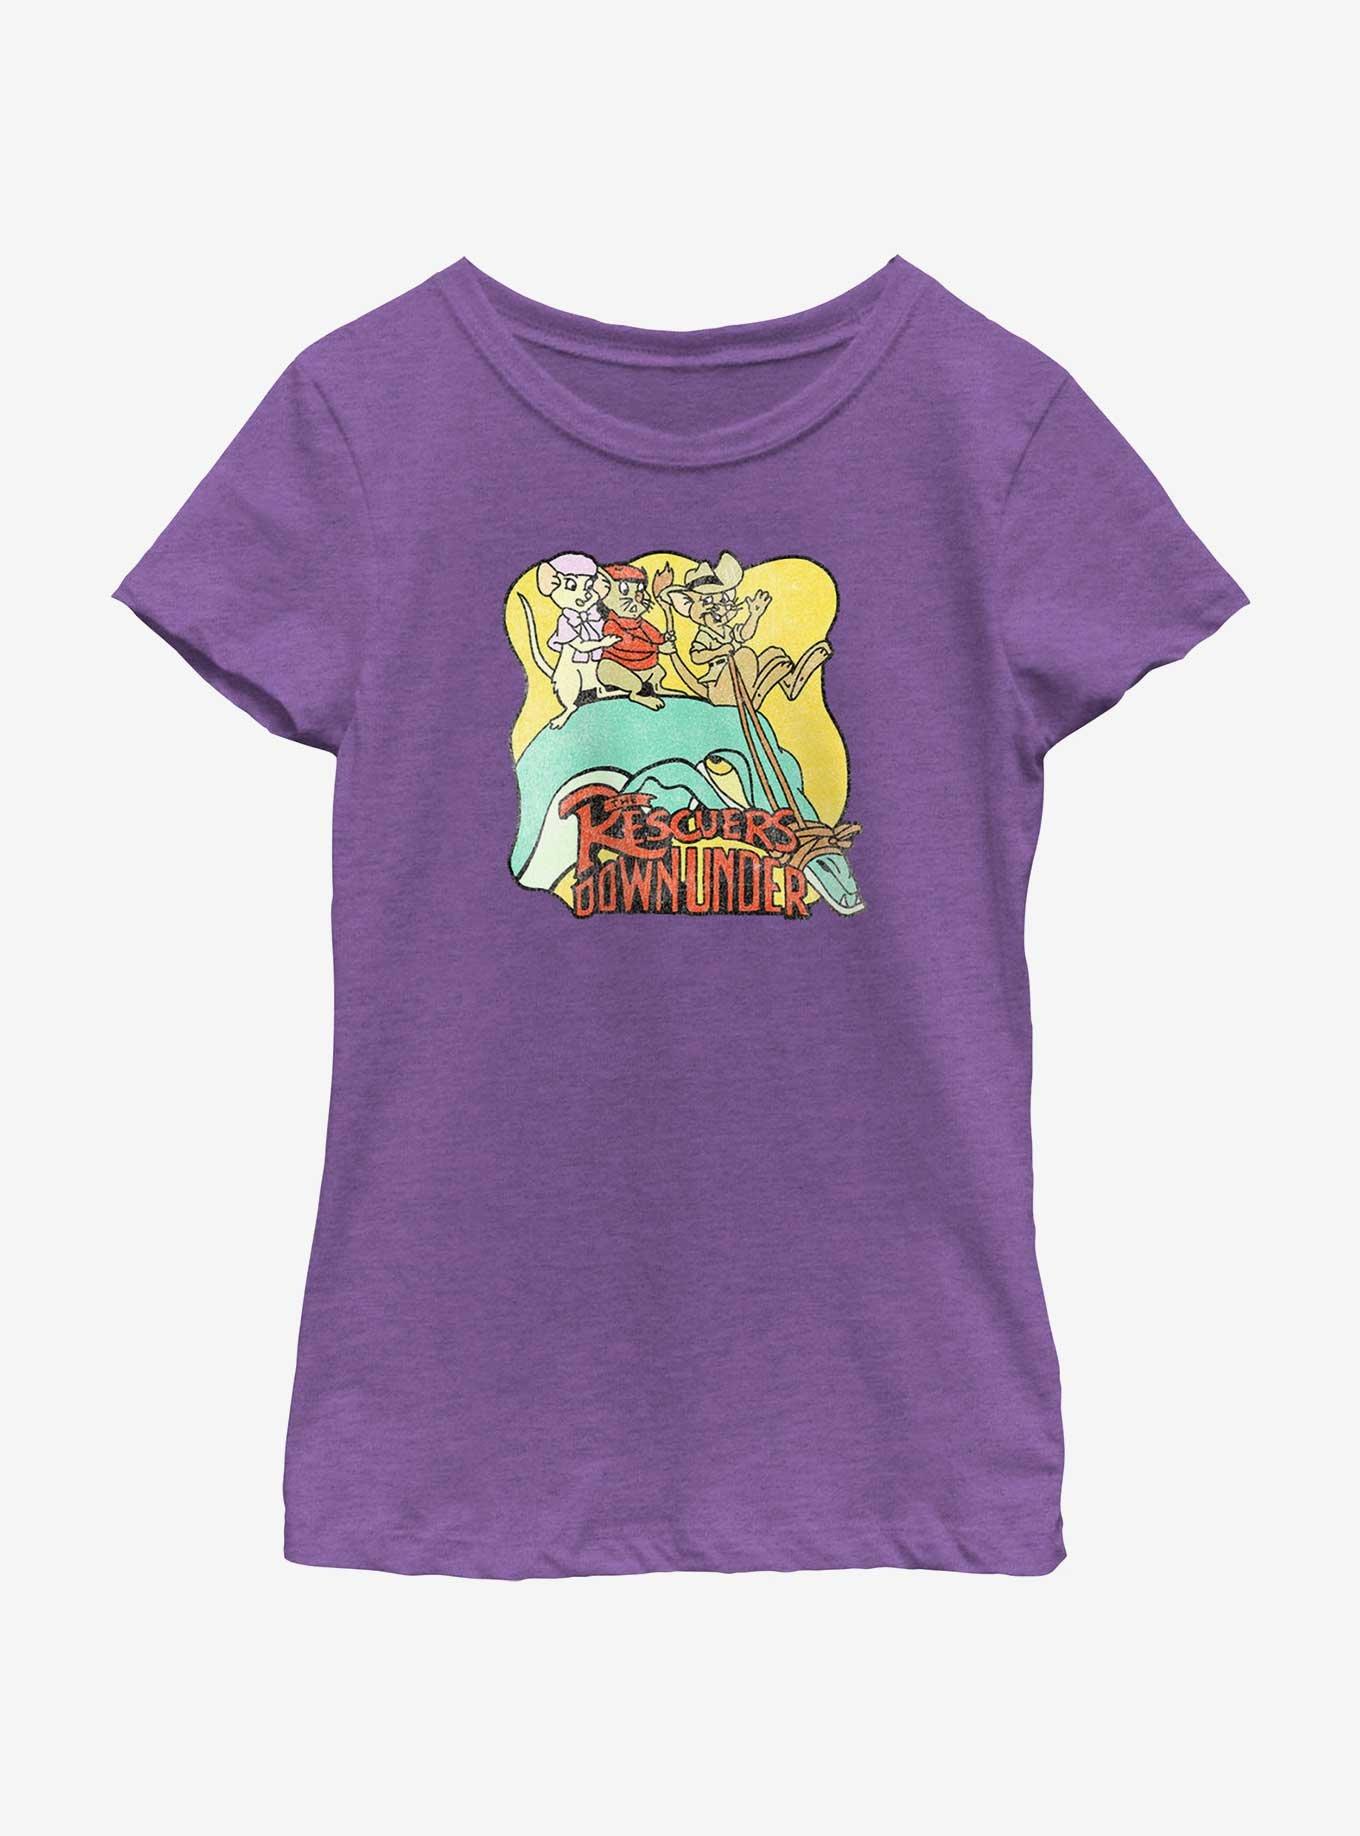 Disney The Rescuers Down Under Adventures With Jake Youth Girls T-Shirt, PURPLE BERRY, hi-res